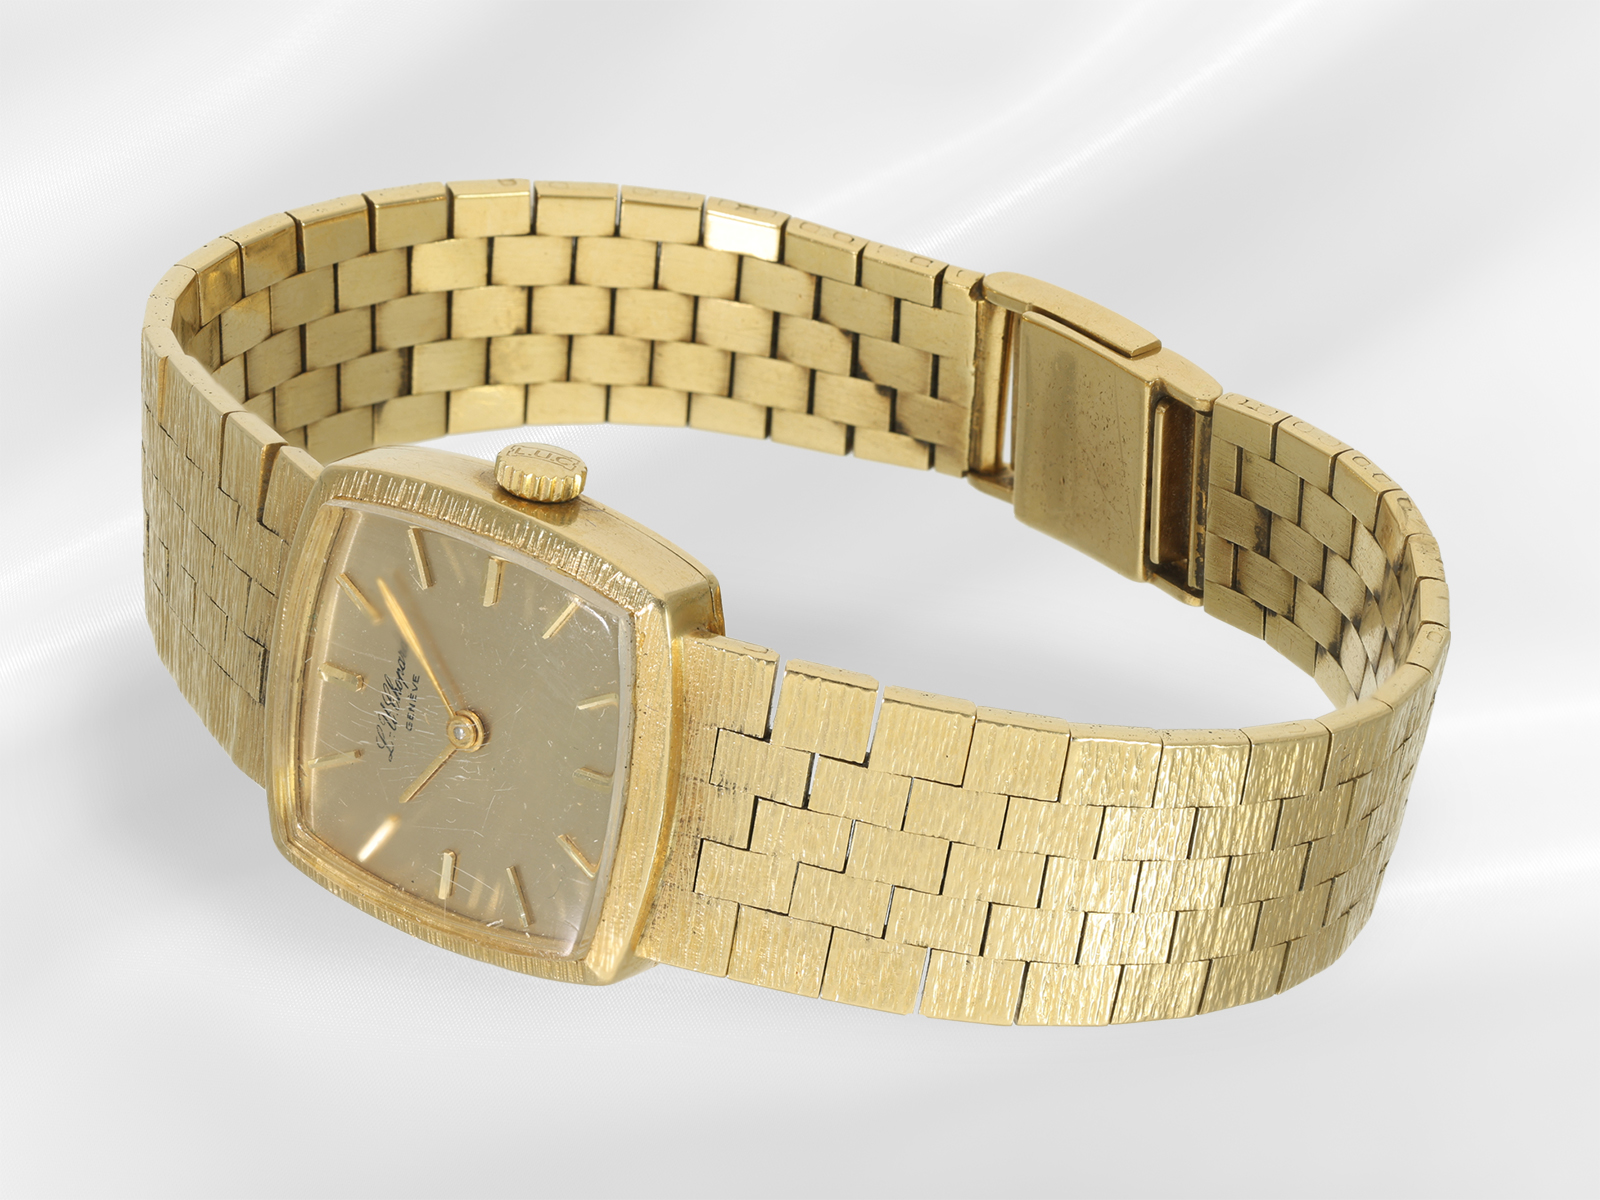 Wristwatch: high-quality and formerly expensive vintage ladies' watch by Chopard, 18K gold - Image 2 of 3